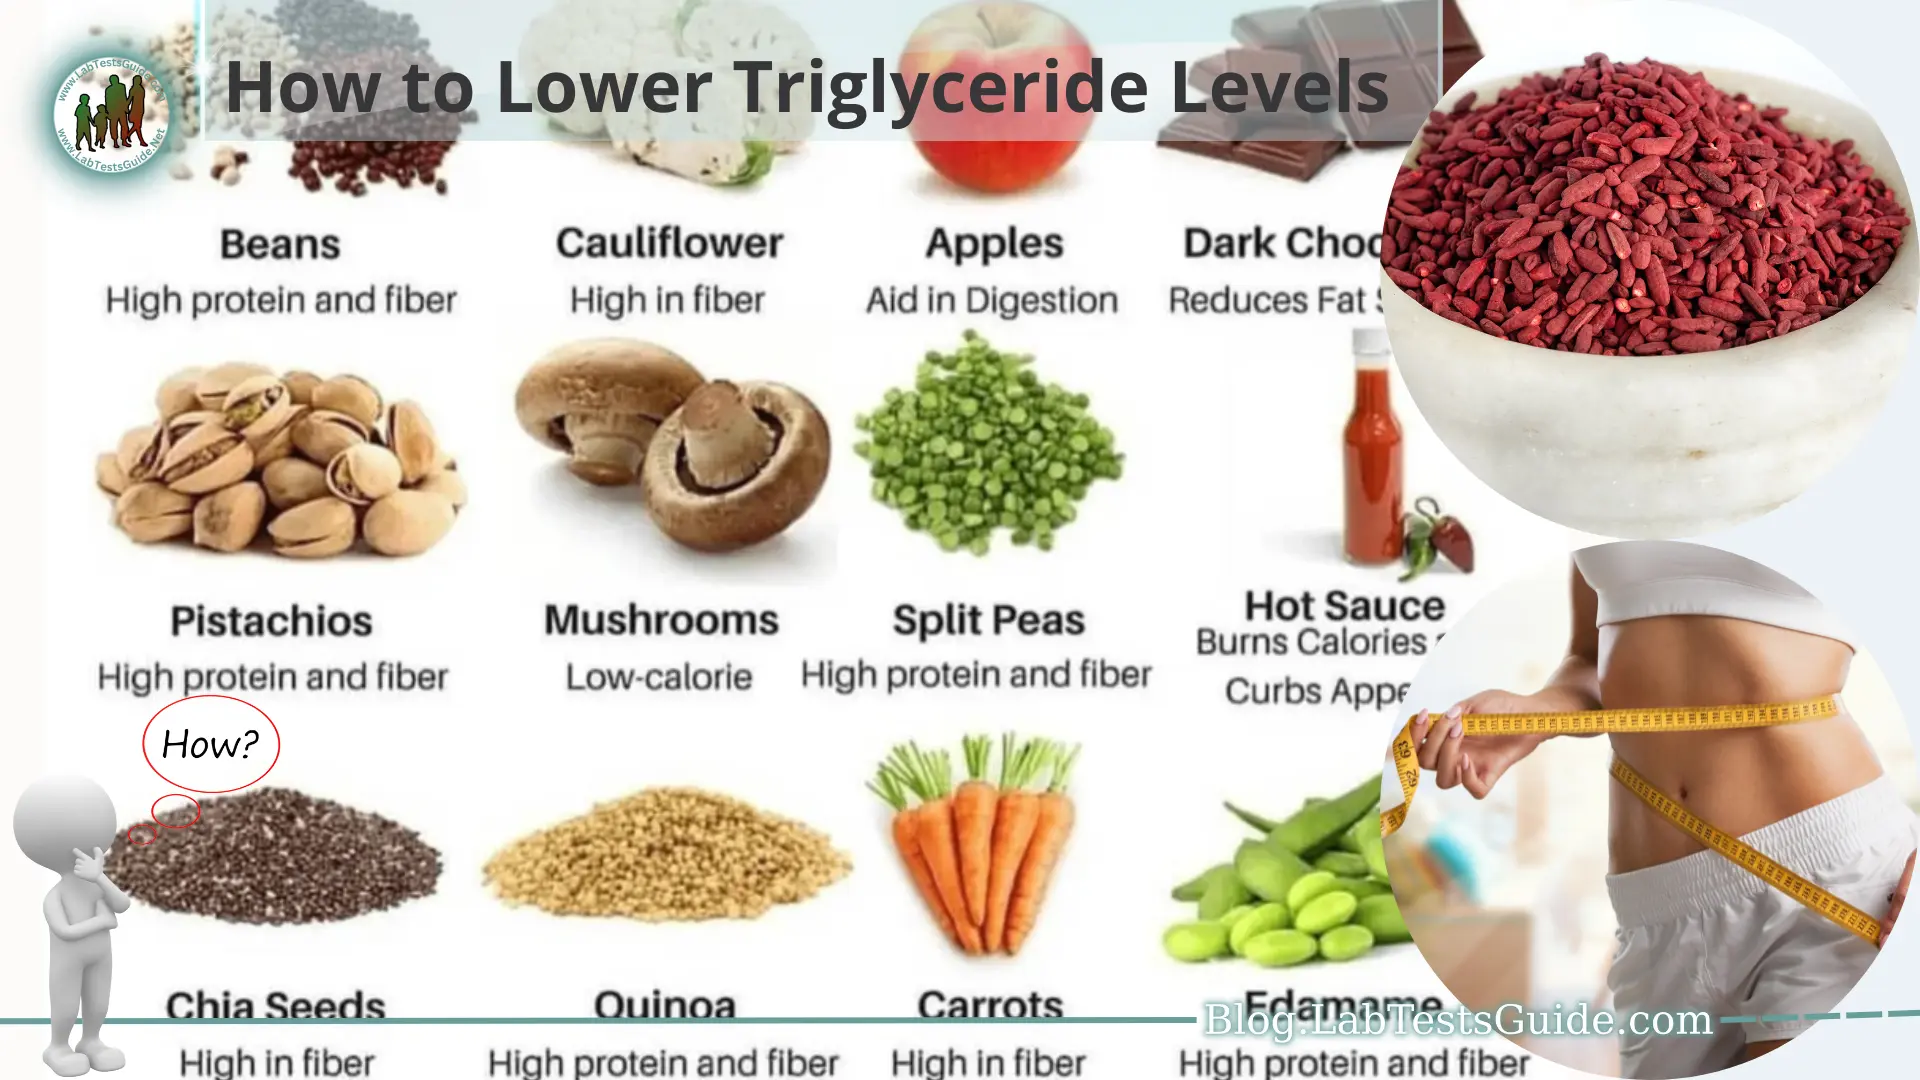 How To Lower Triglyceride Levels.webp